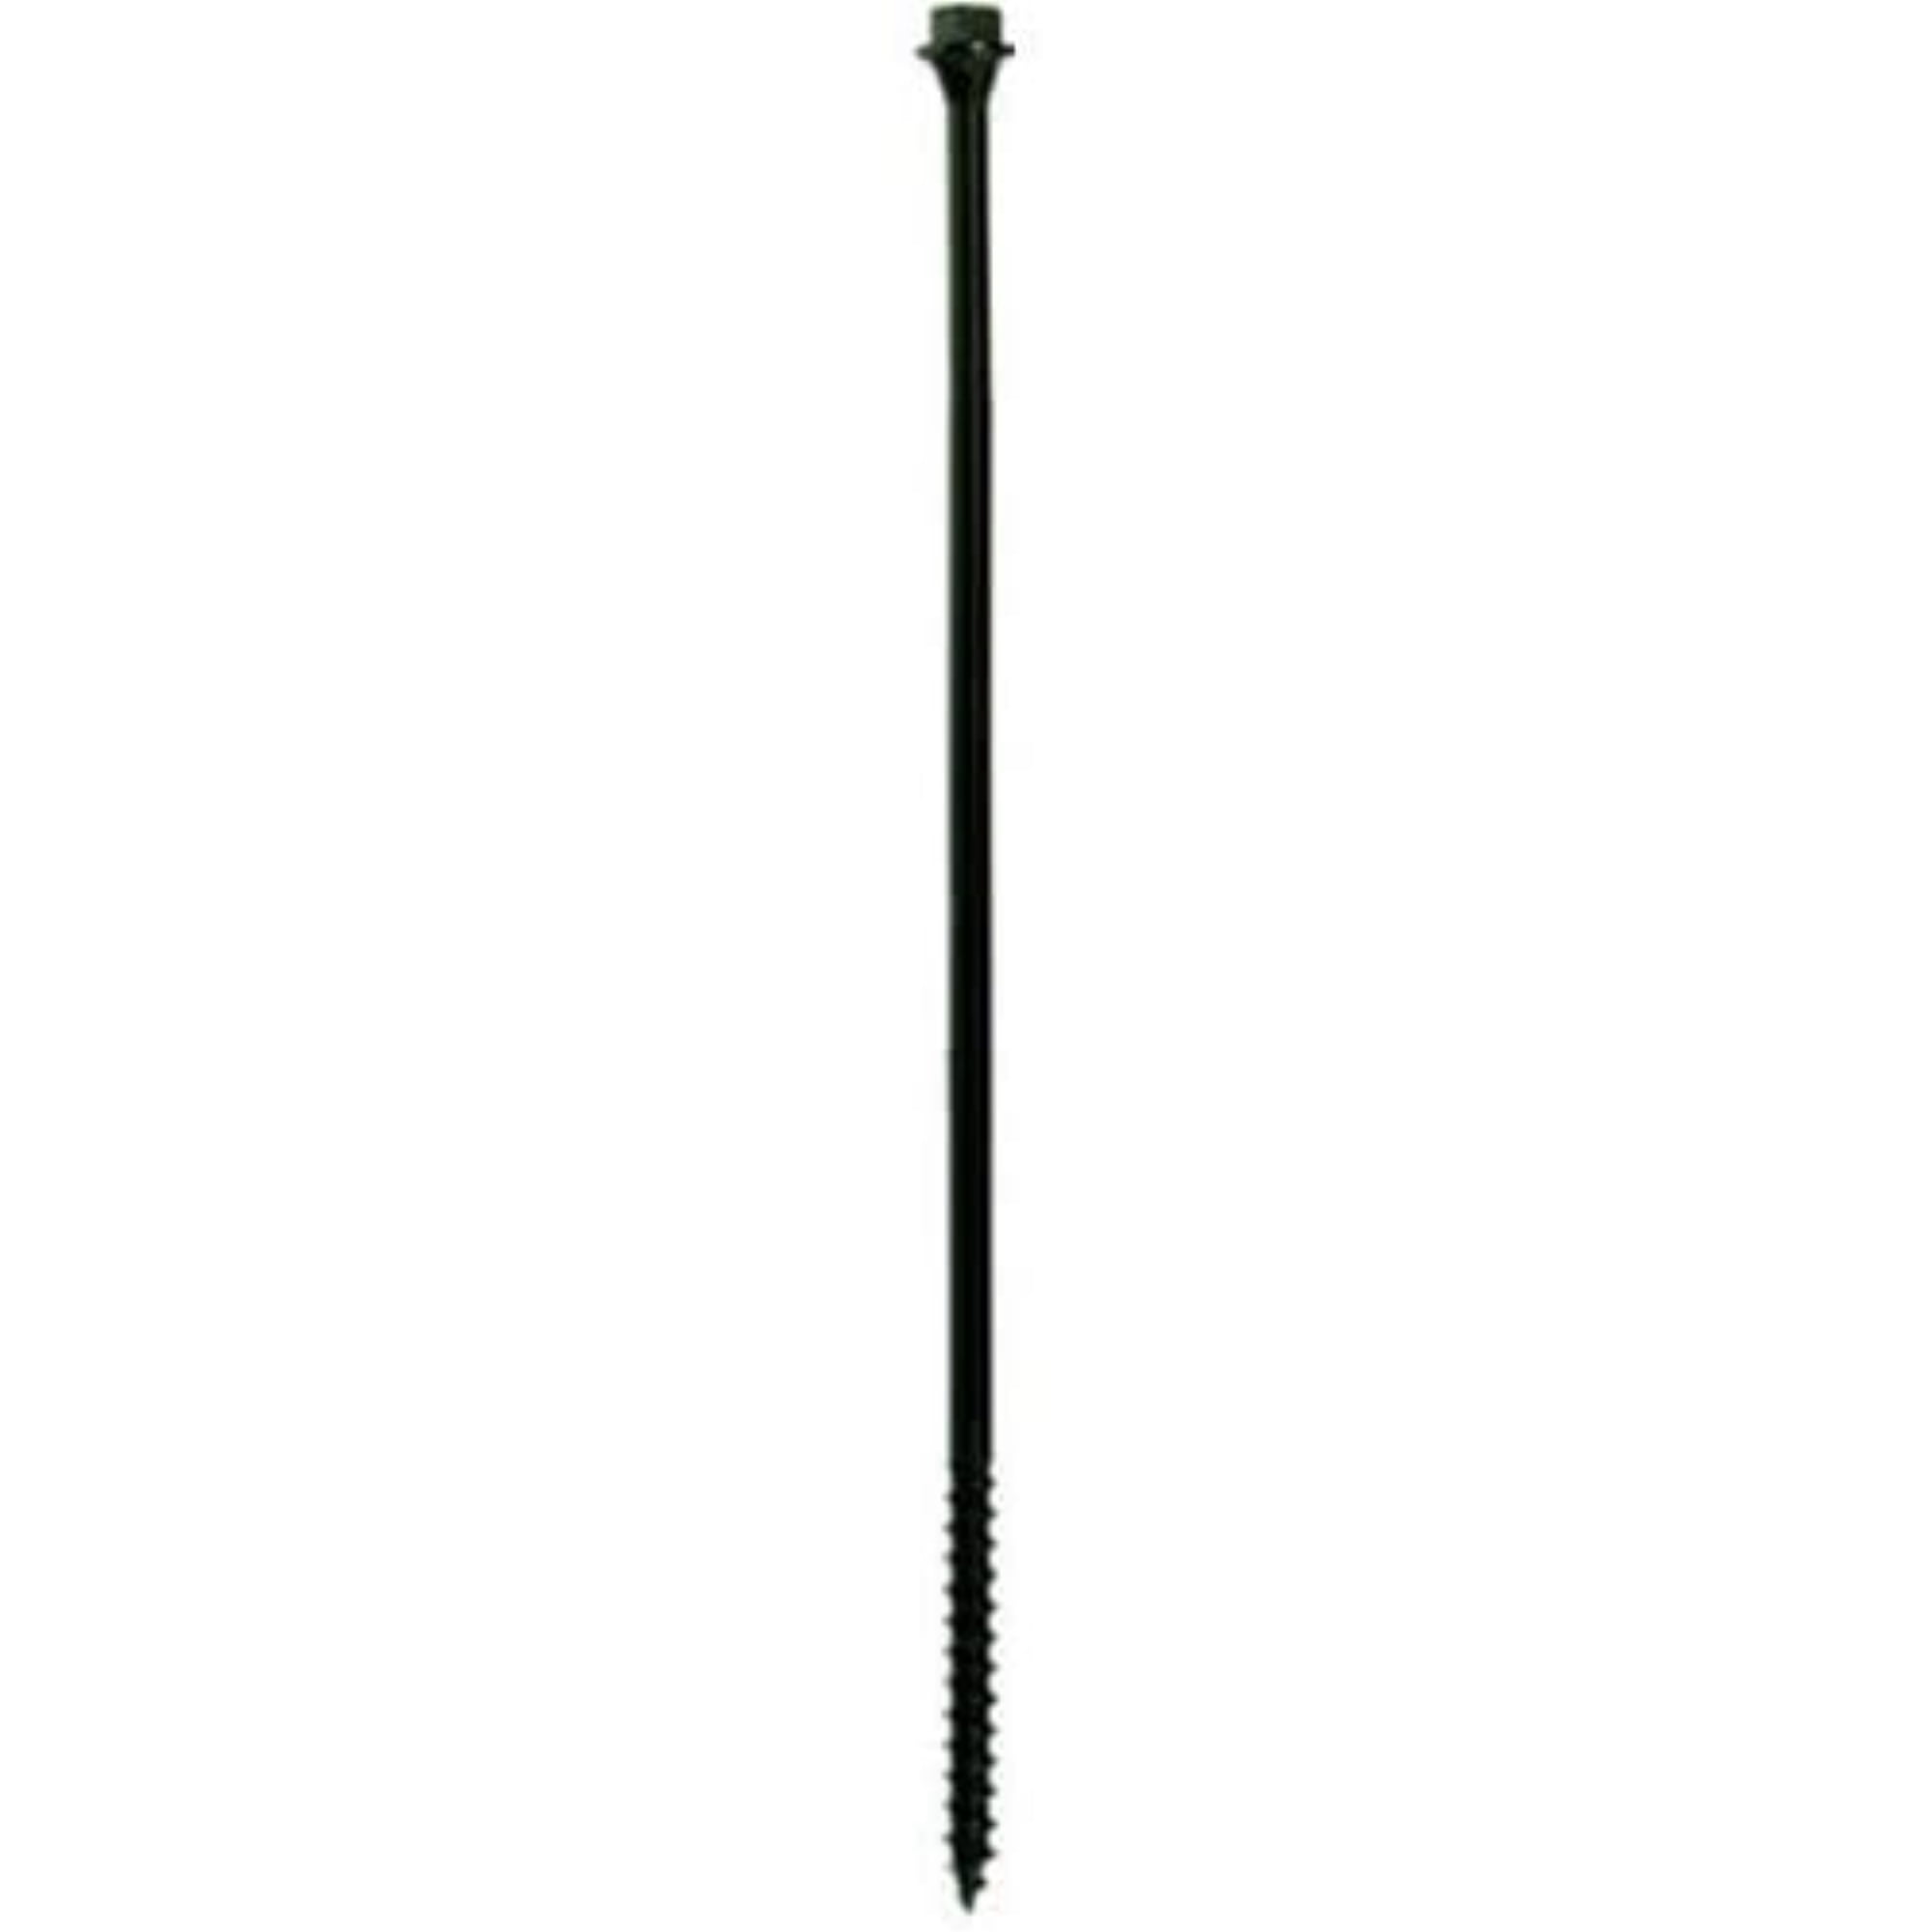 250 Count for sale online FastenMaster Timberlok 6 inch Wood Screw